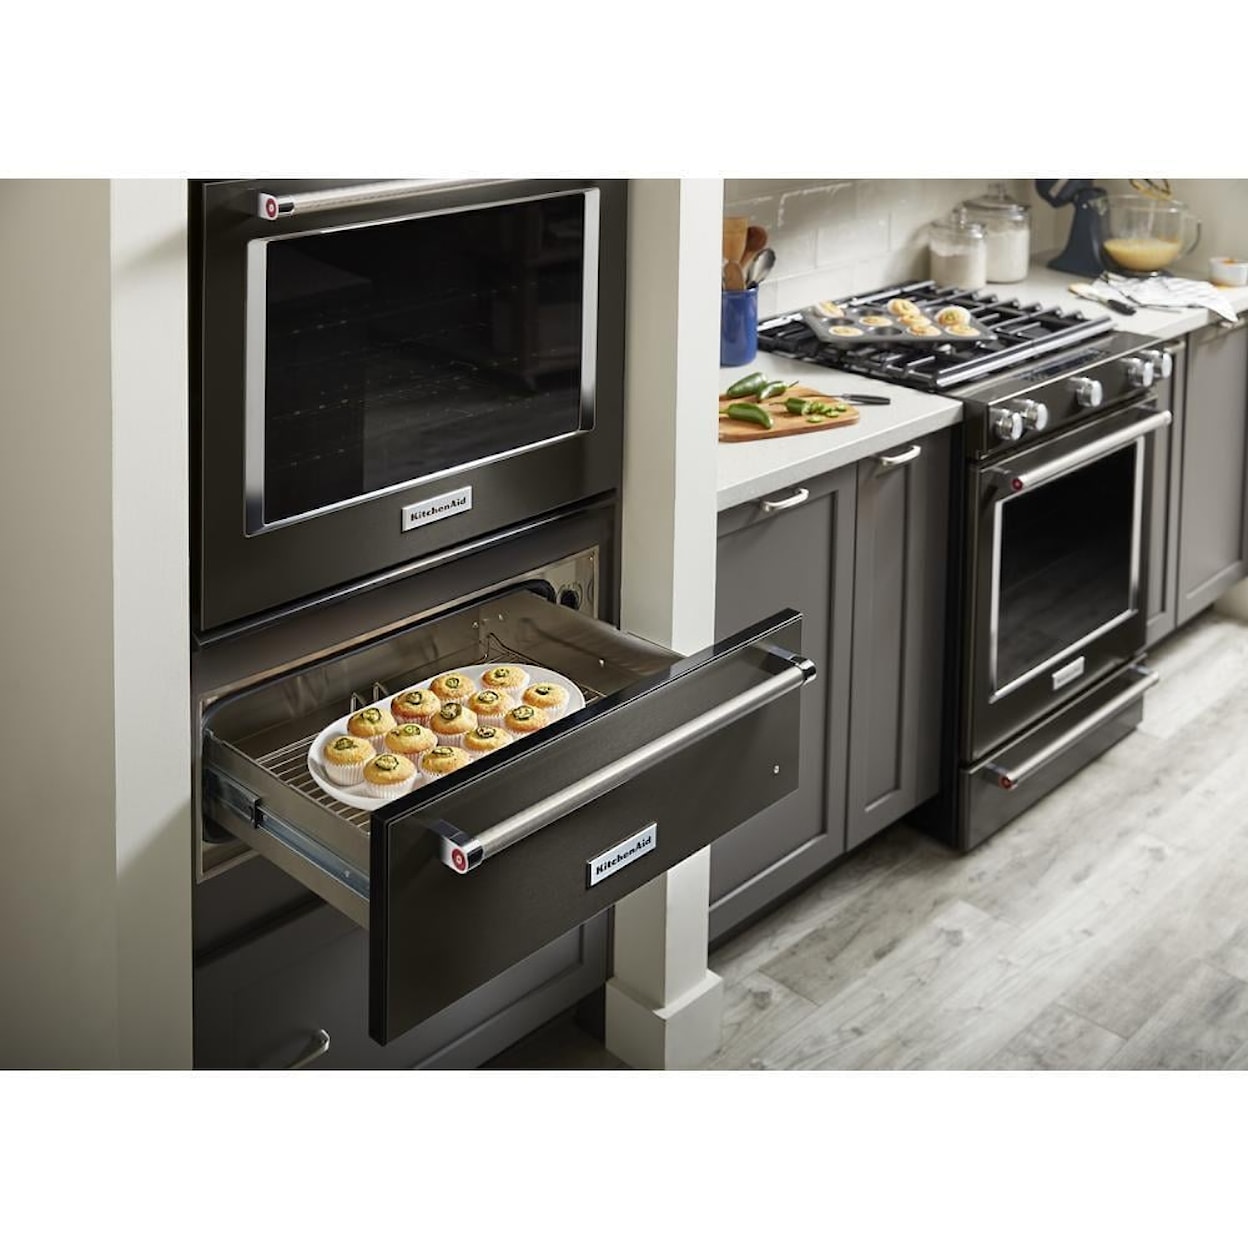 KitchenAid Electric Ranges Single Wall Electric Oven